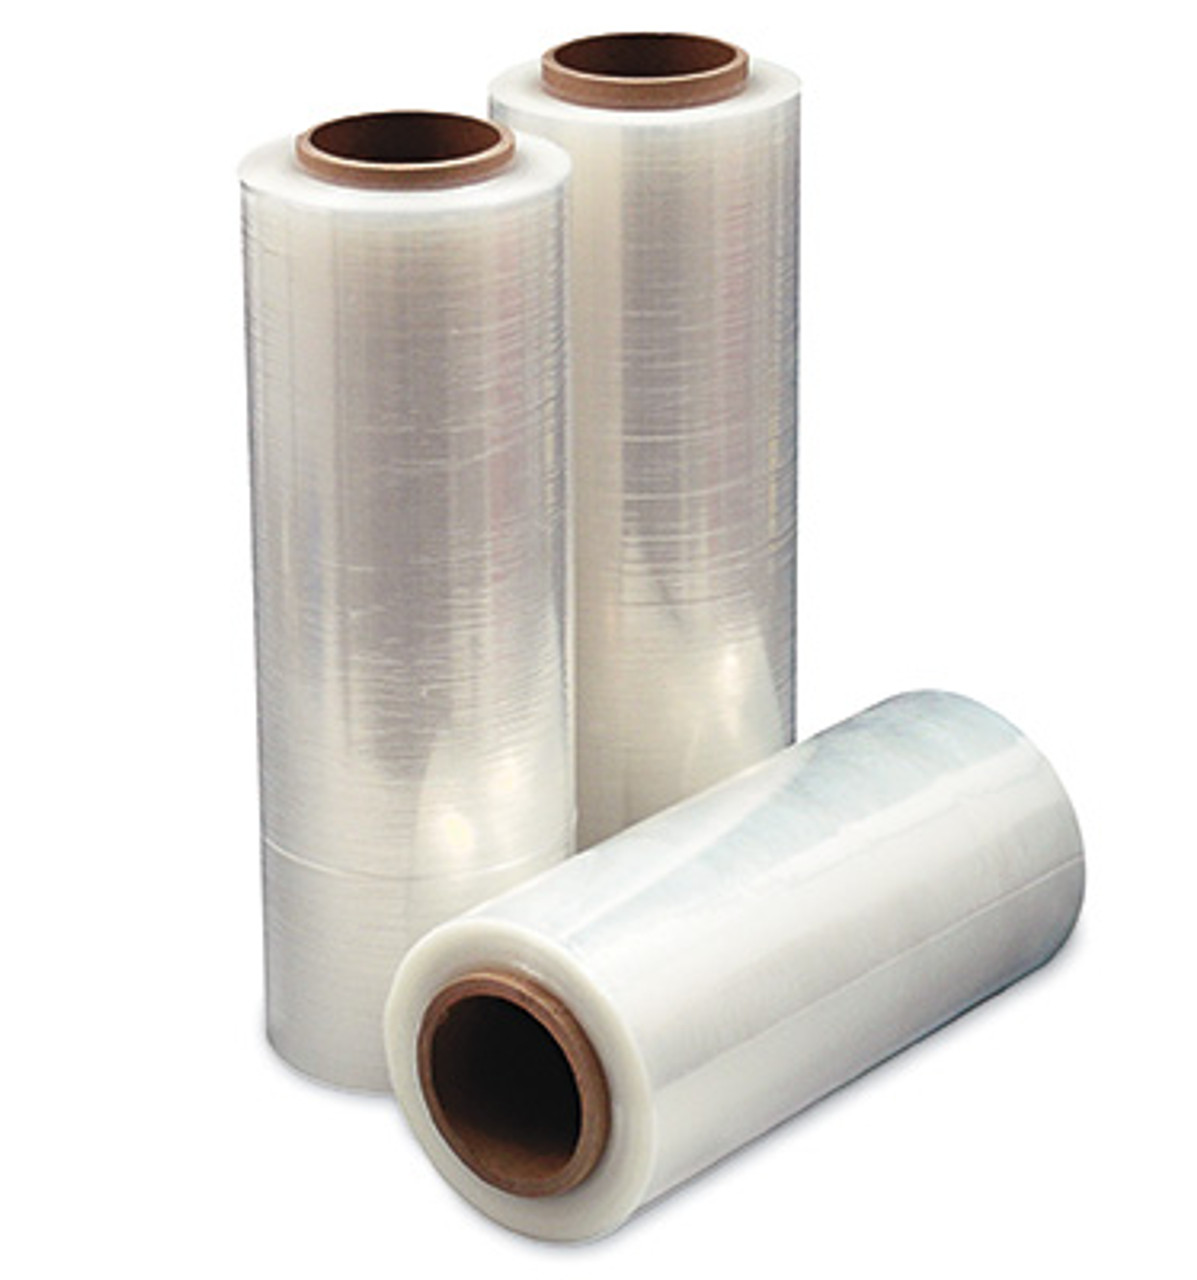 Our Own Brand Blown Stretch Wrap (Qty) 1 Roll